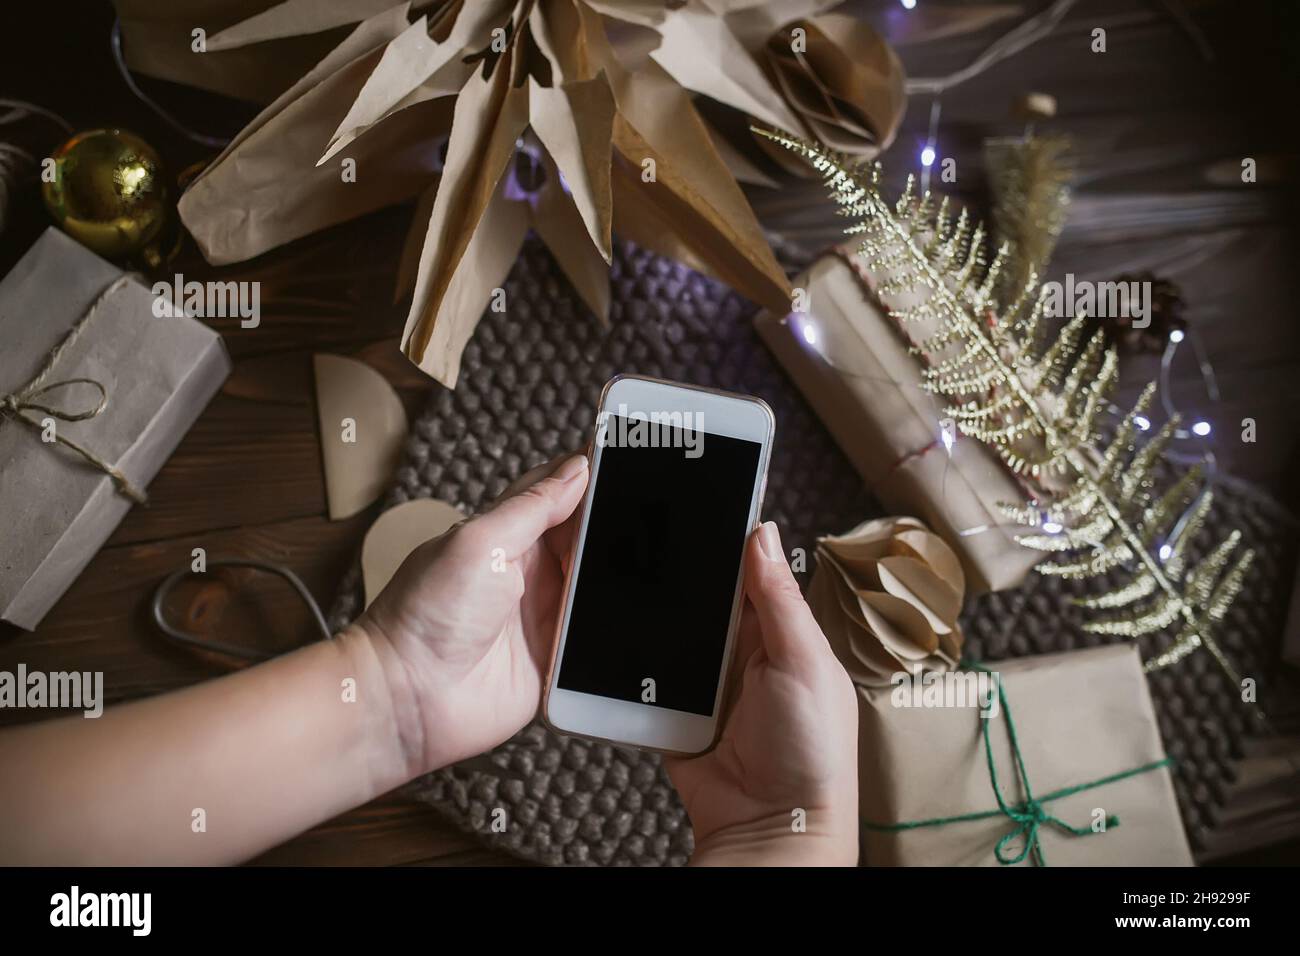 Hands holding a mobile phone on the background of Christmas decorations made of recycled materials and paper Stock Photo